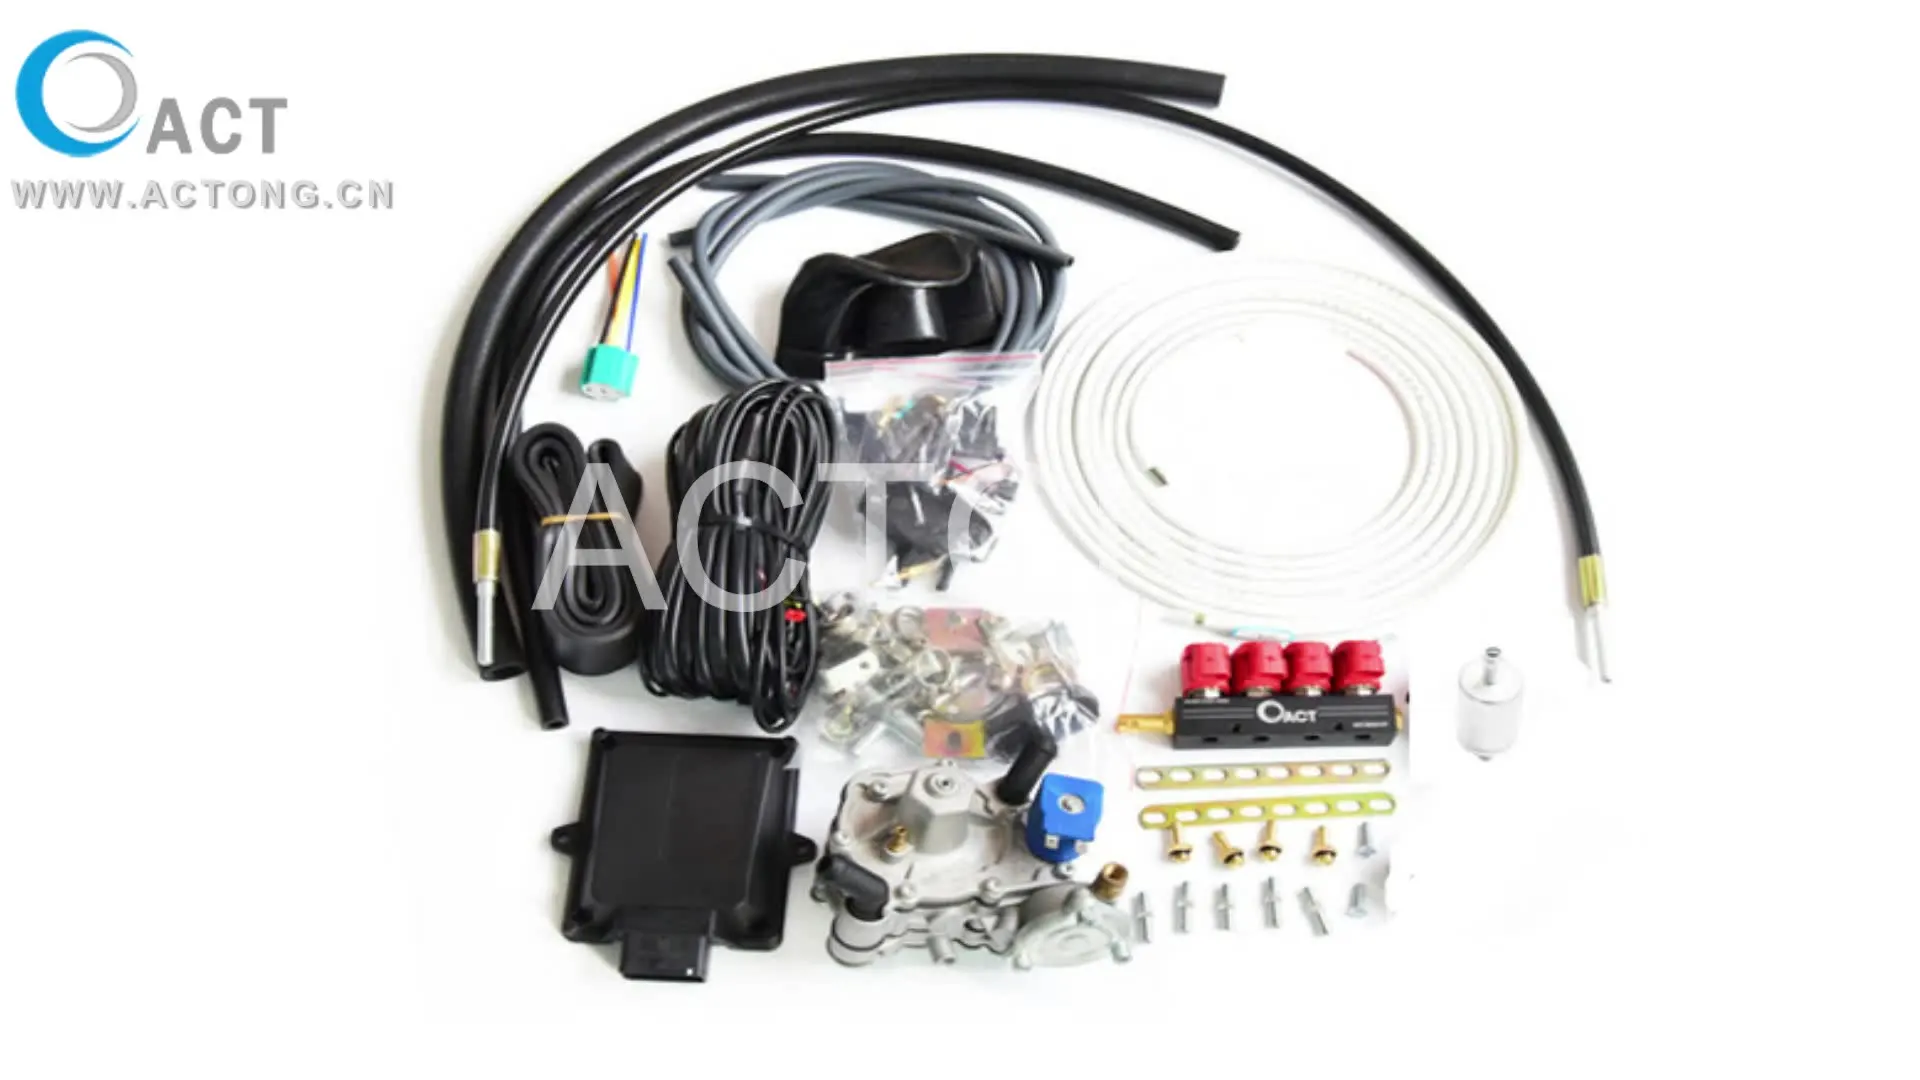 

ACT FACTORY DIRECTLY SALE petrol engine autogas lpg conversion kit for other cars and truck auto parts